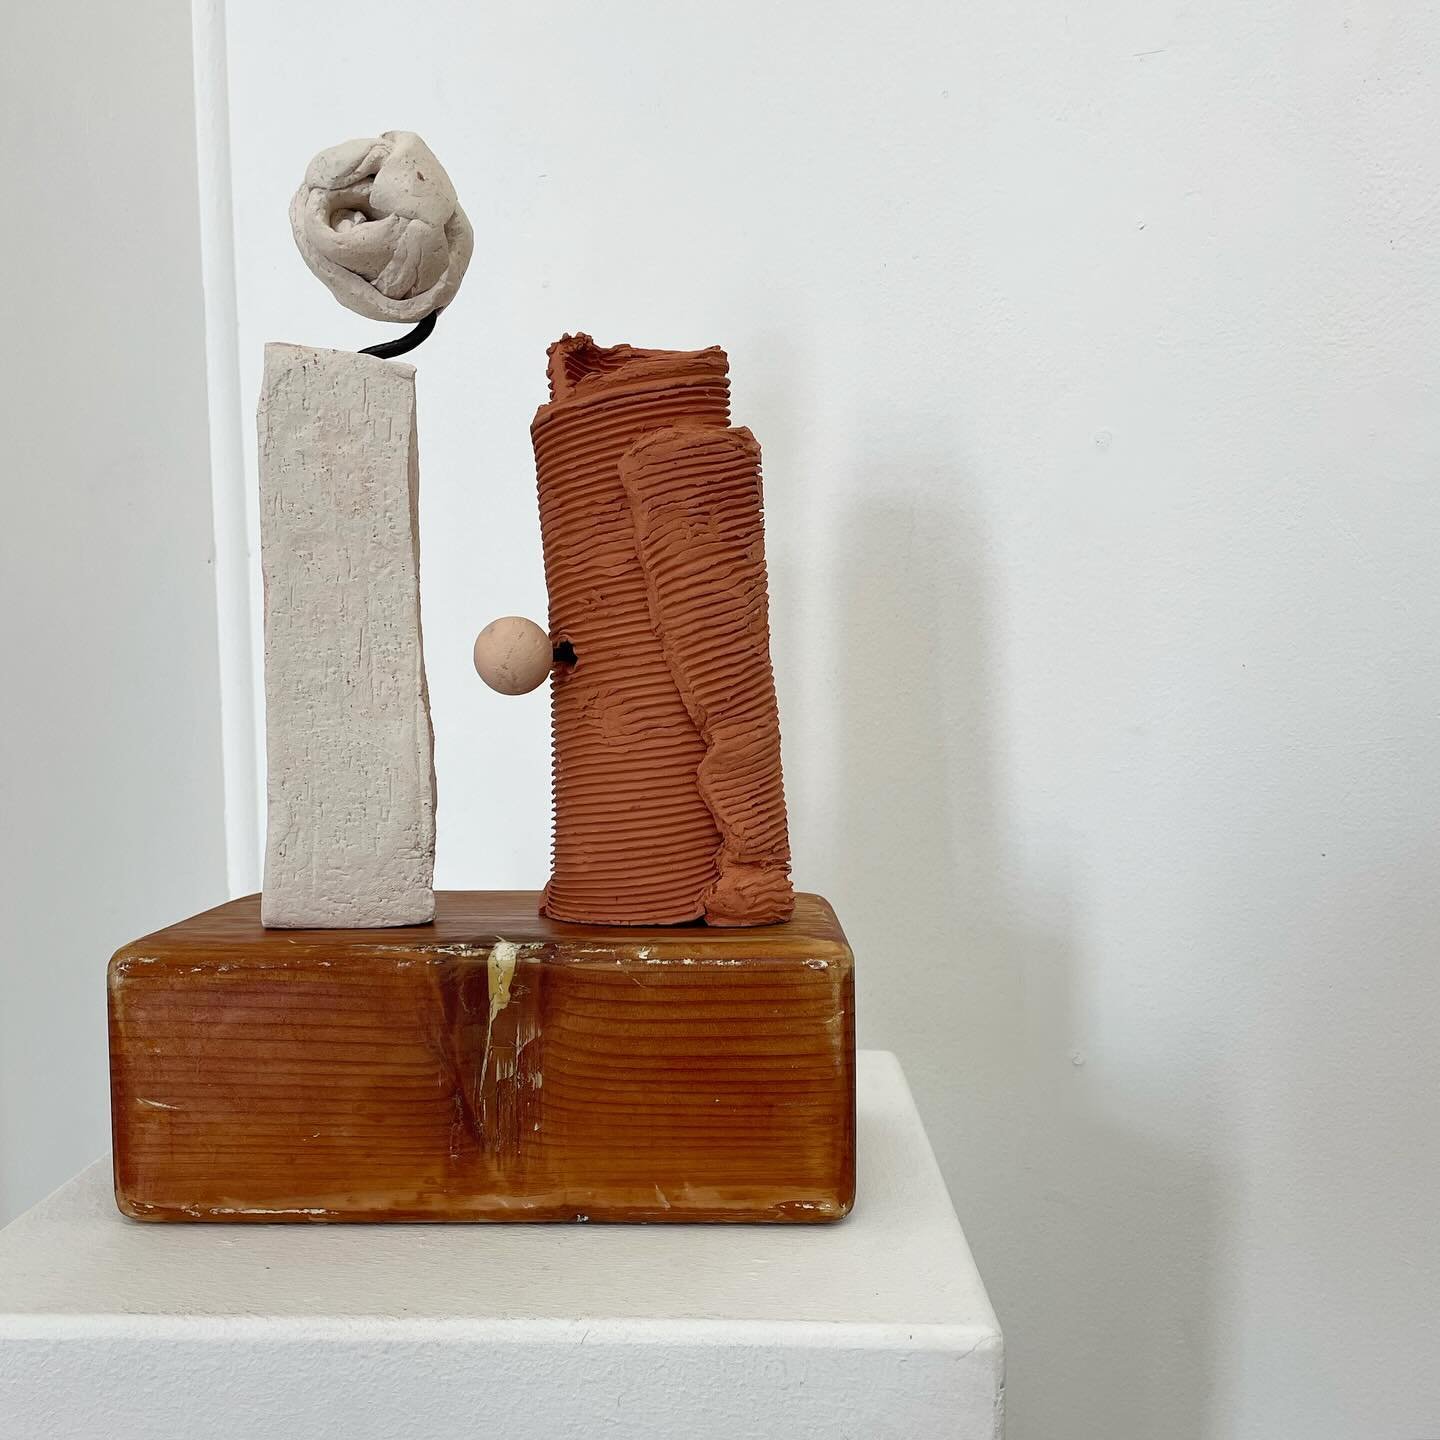 The Dangling Conversation
Patrick Lears
The Lido Stores
11 &ndash; 27 April 2024

&lsquo;somatic sensing&rsquo;
ceramic, steel and wood

&lsquo;waking giant&rsquo;
ceramic, flint and wood

&lsquo;endymion&rsquo;
ceramic and flint

Patrick Lears&rsquo